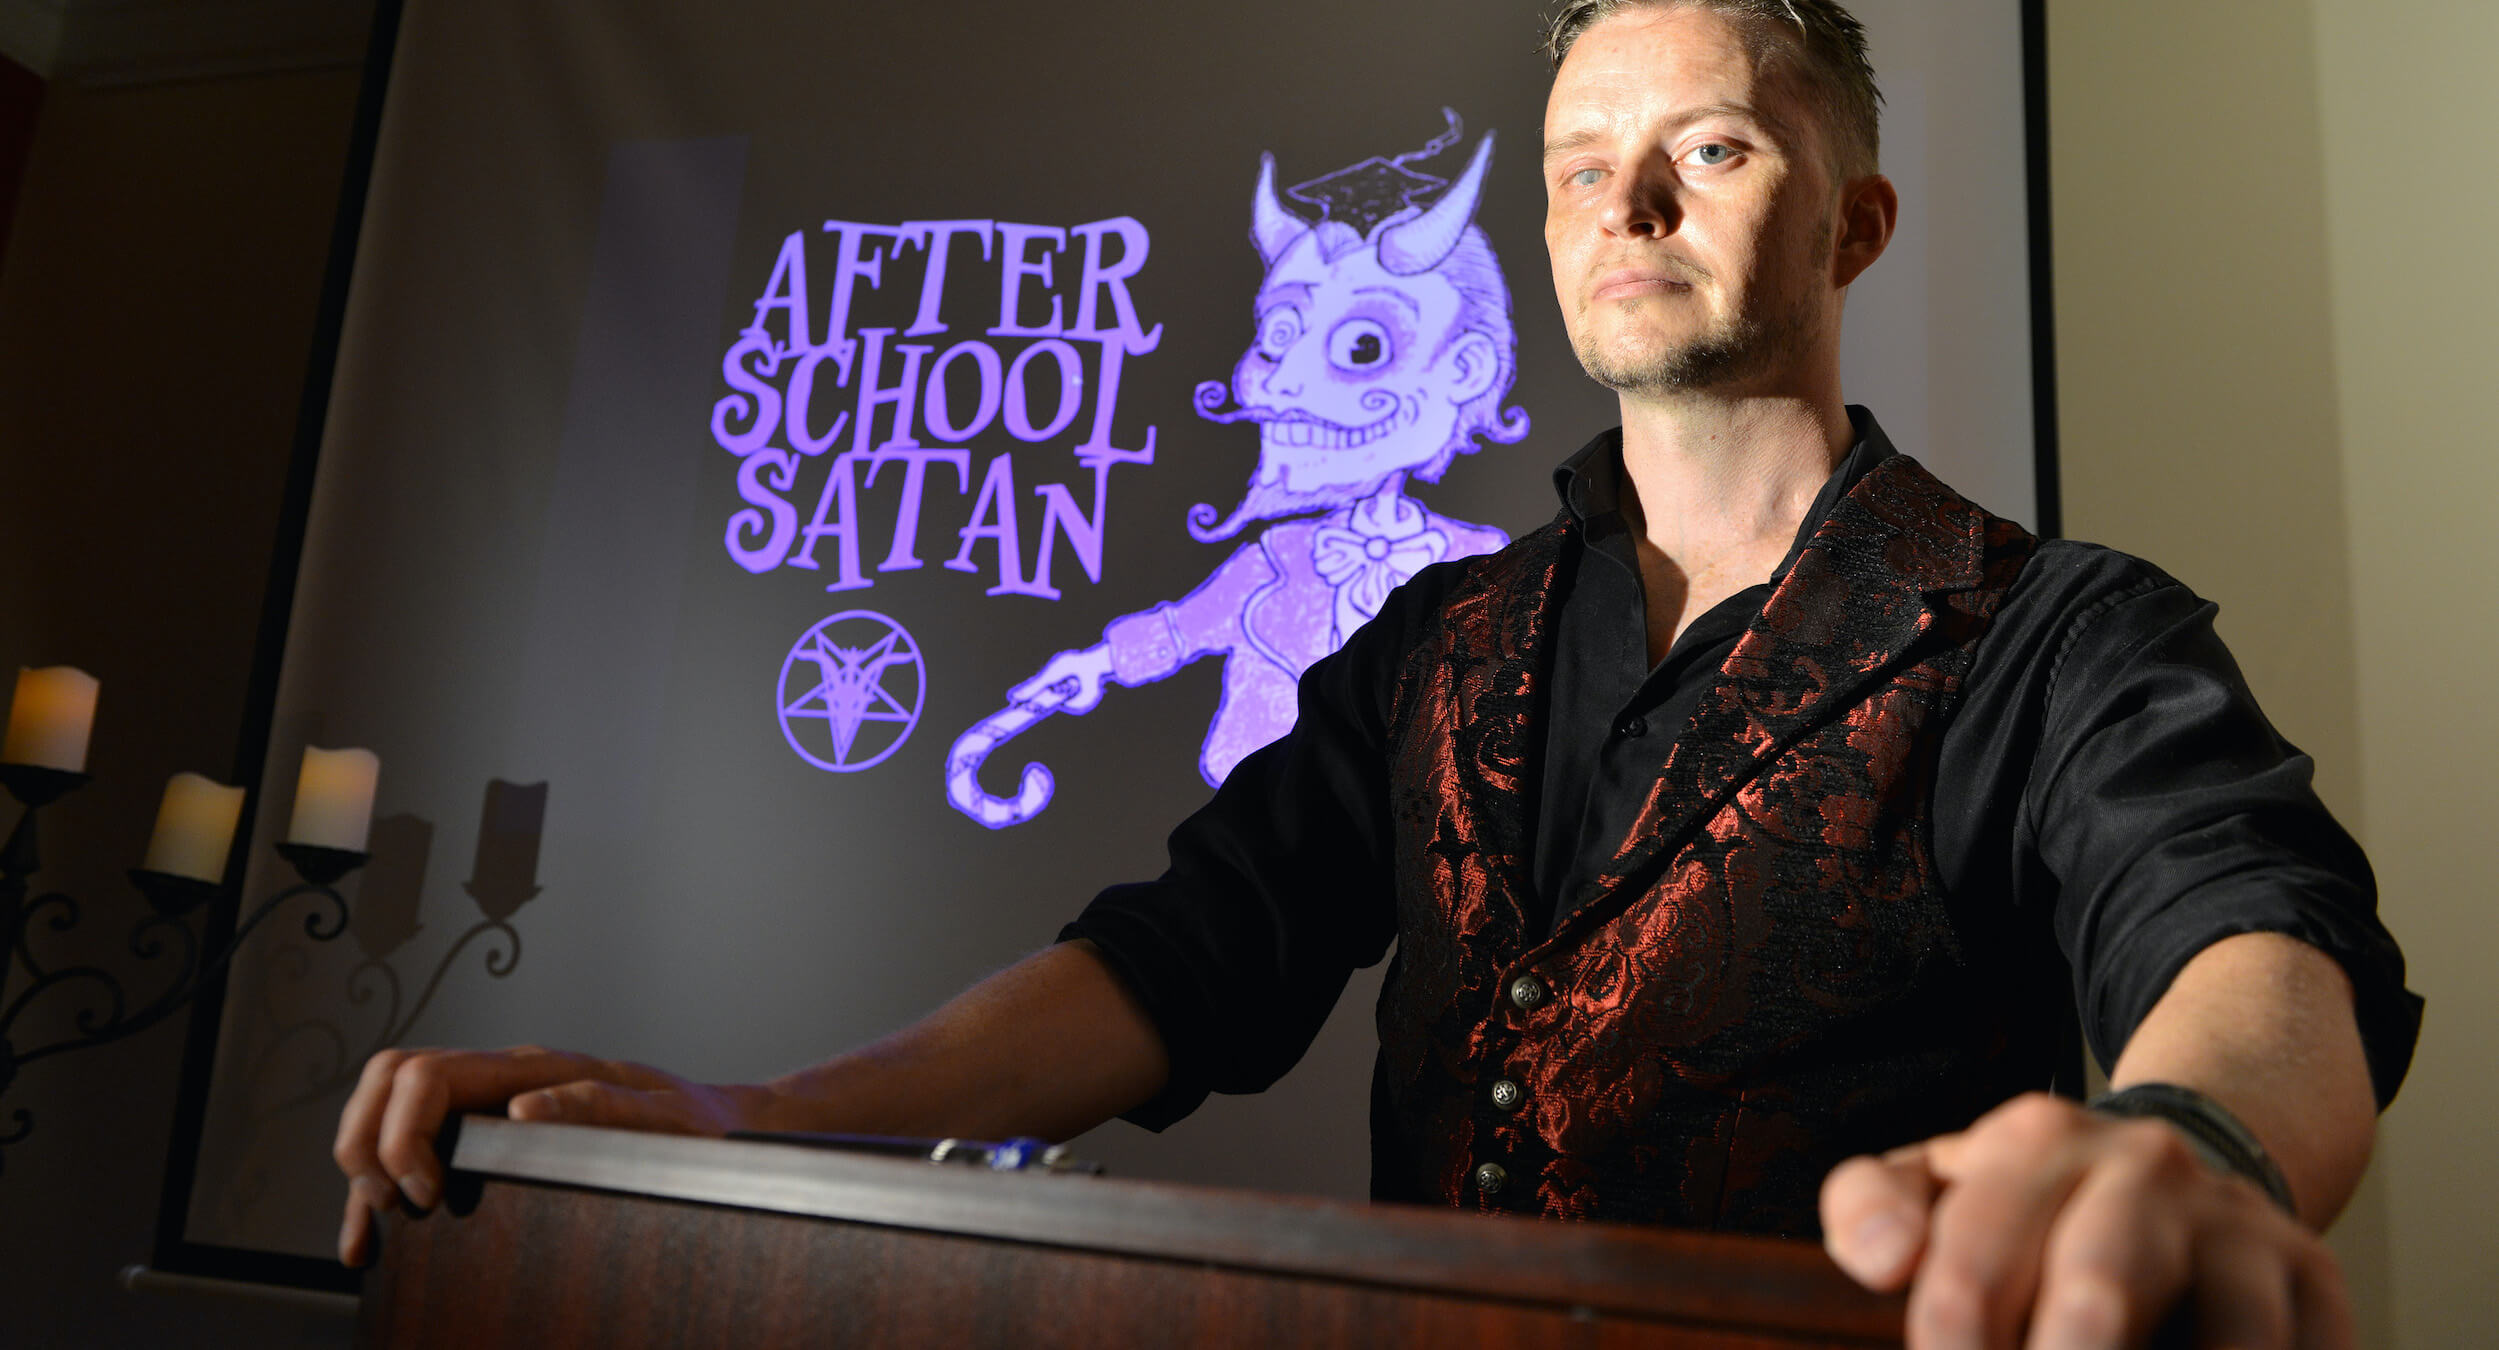 After School Satan Club Provokes Parent Outrage › American Greatness